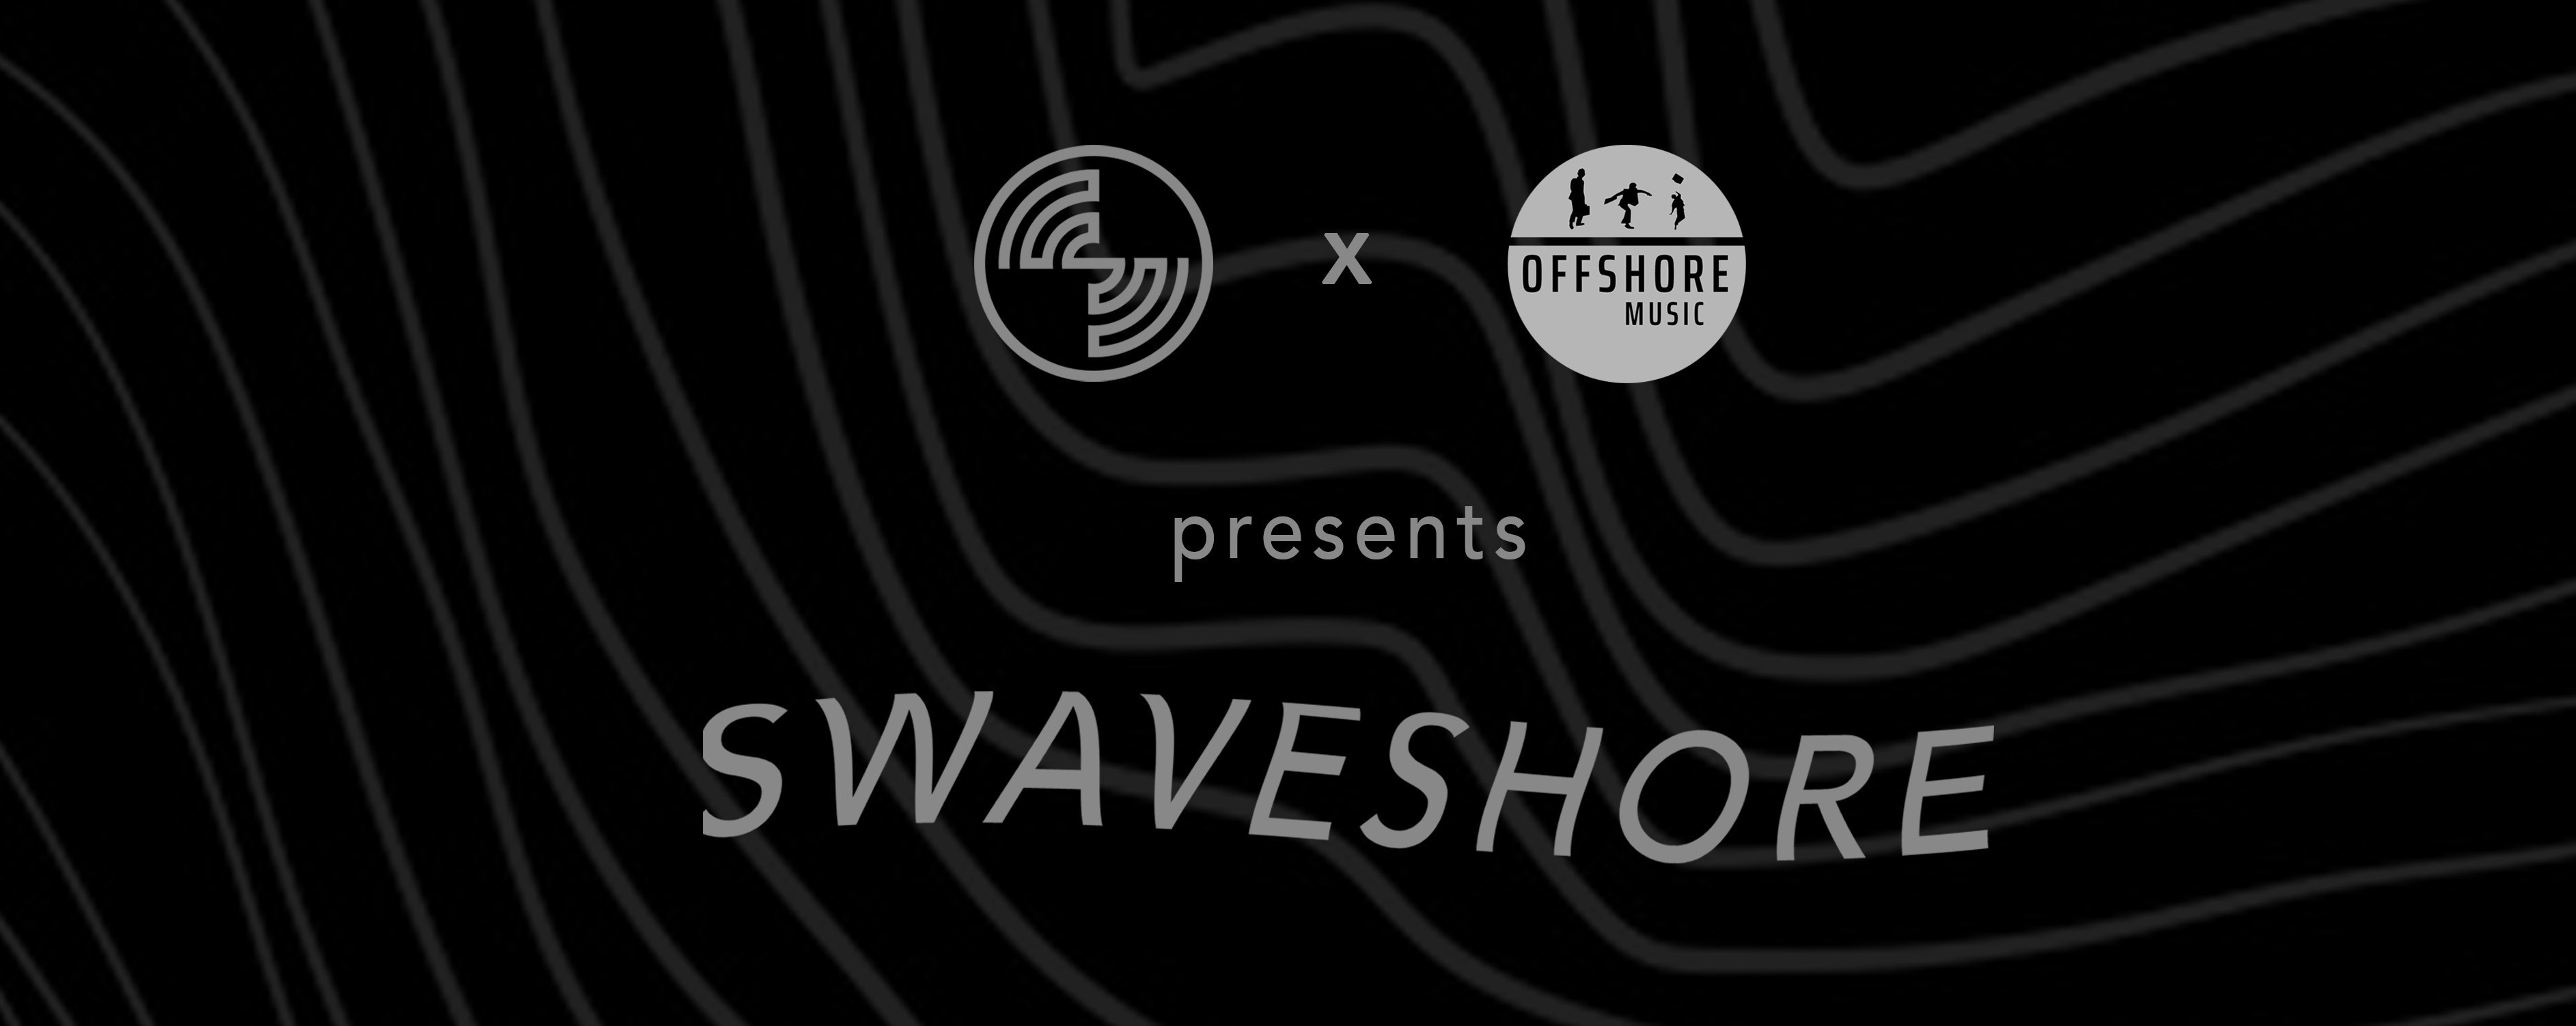  Offshore Music and Swavesound presents: Swaveshore